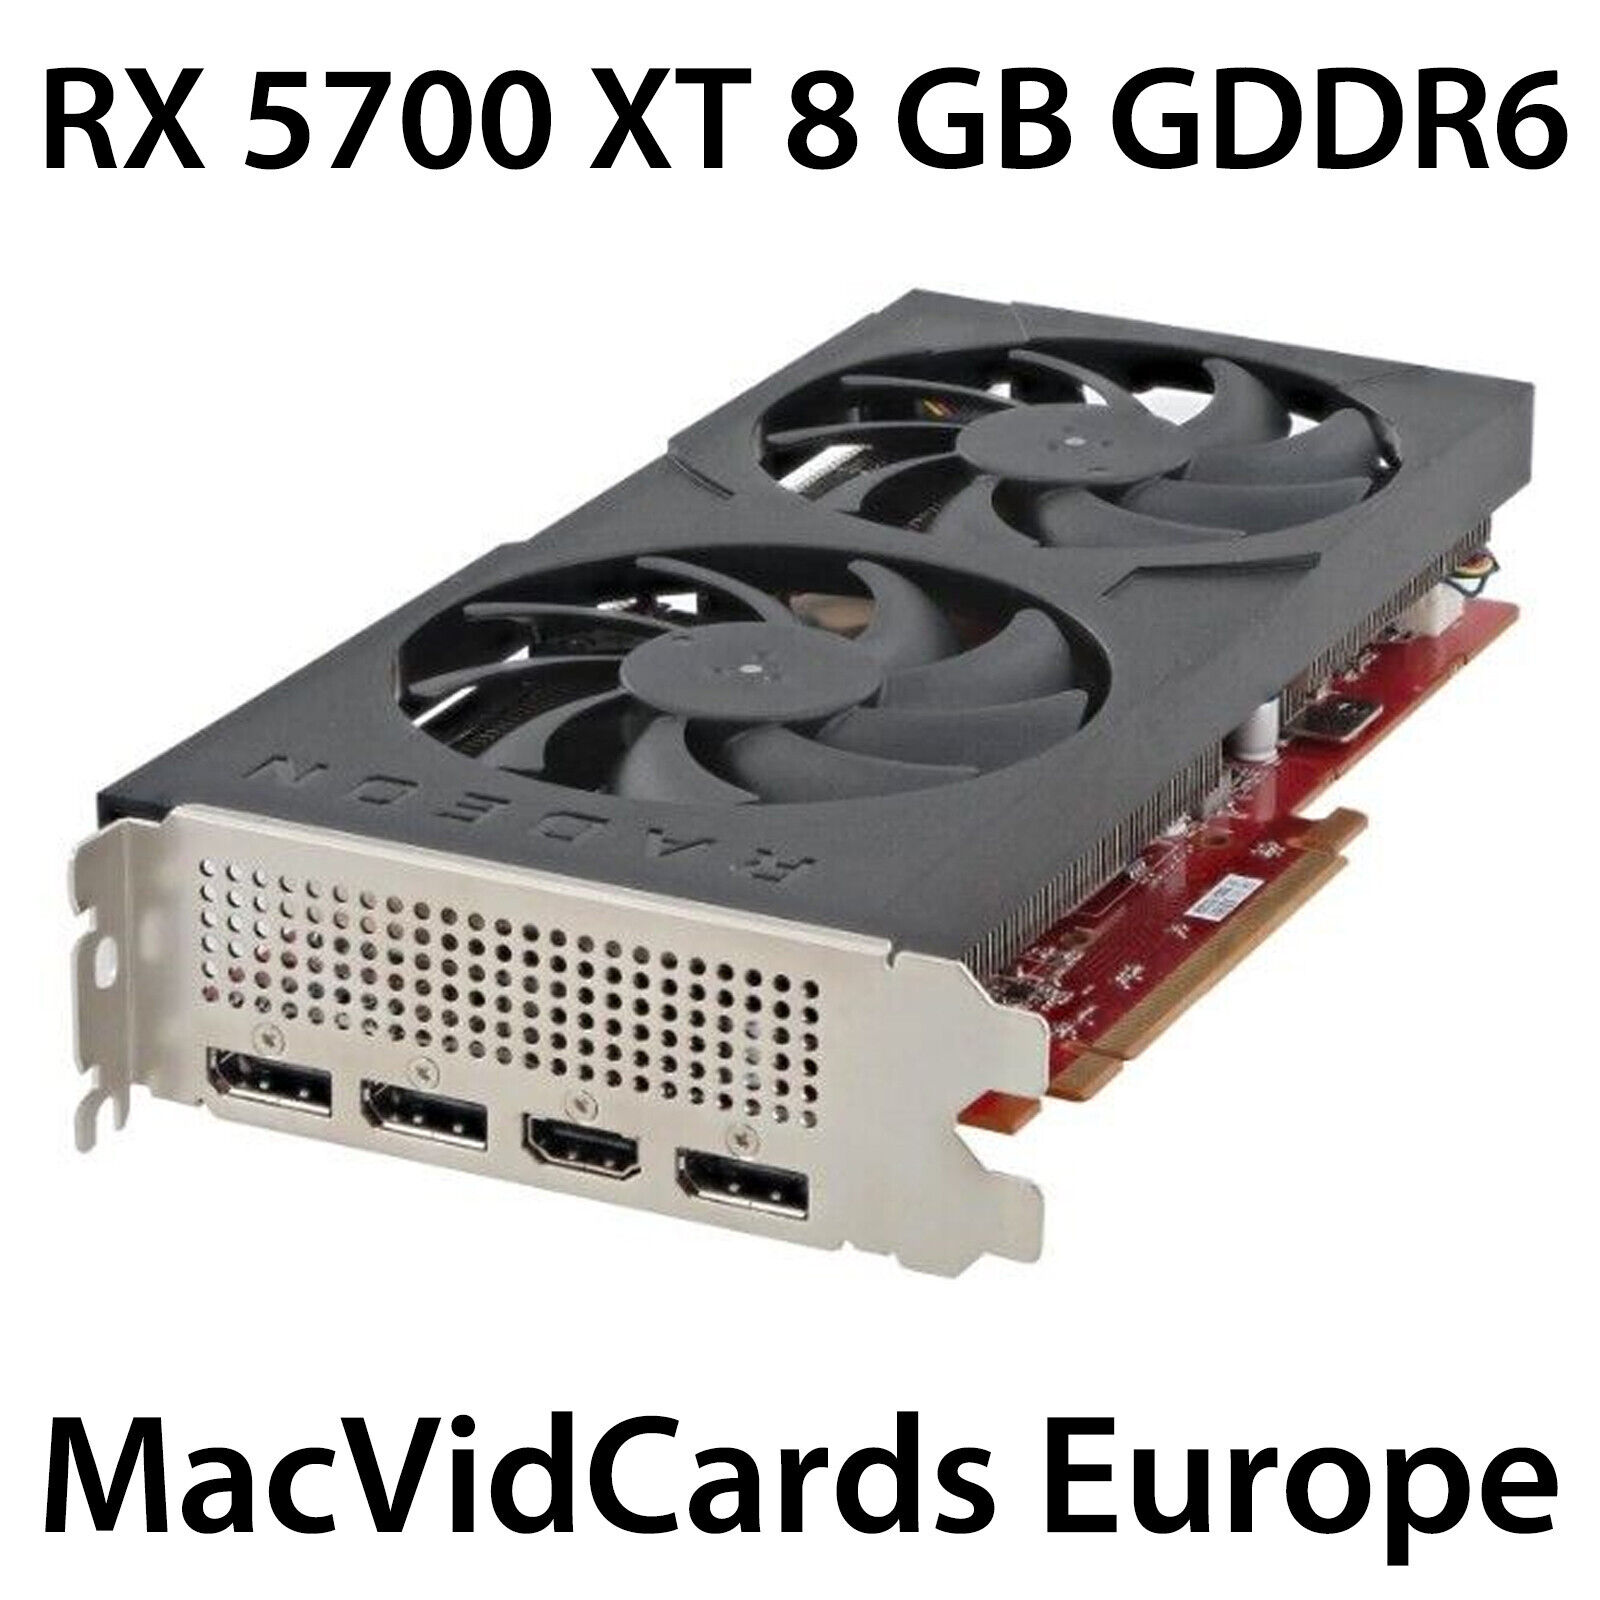 MacVidCards AMD Radeon RX 5700 XT 8 GB GDDR6 for Apple Mac Pro with BOOT SCREEN